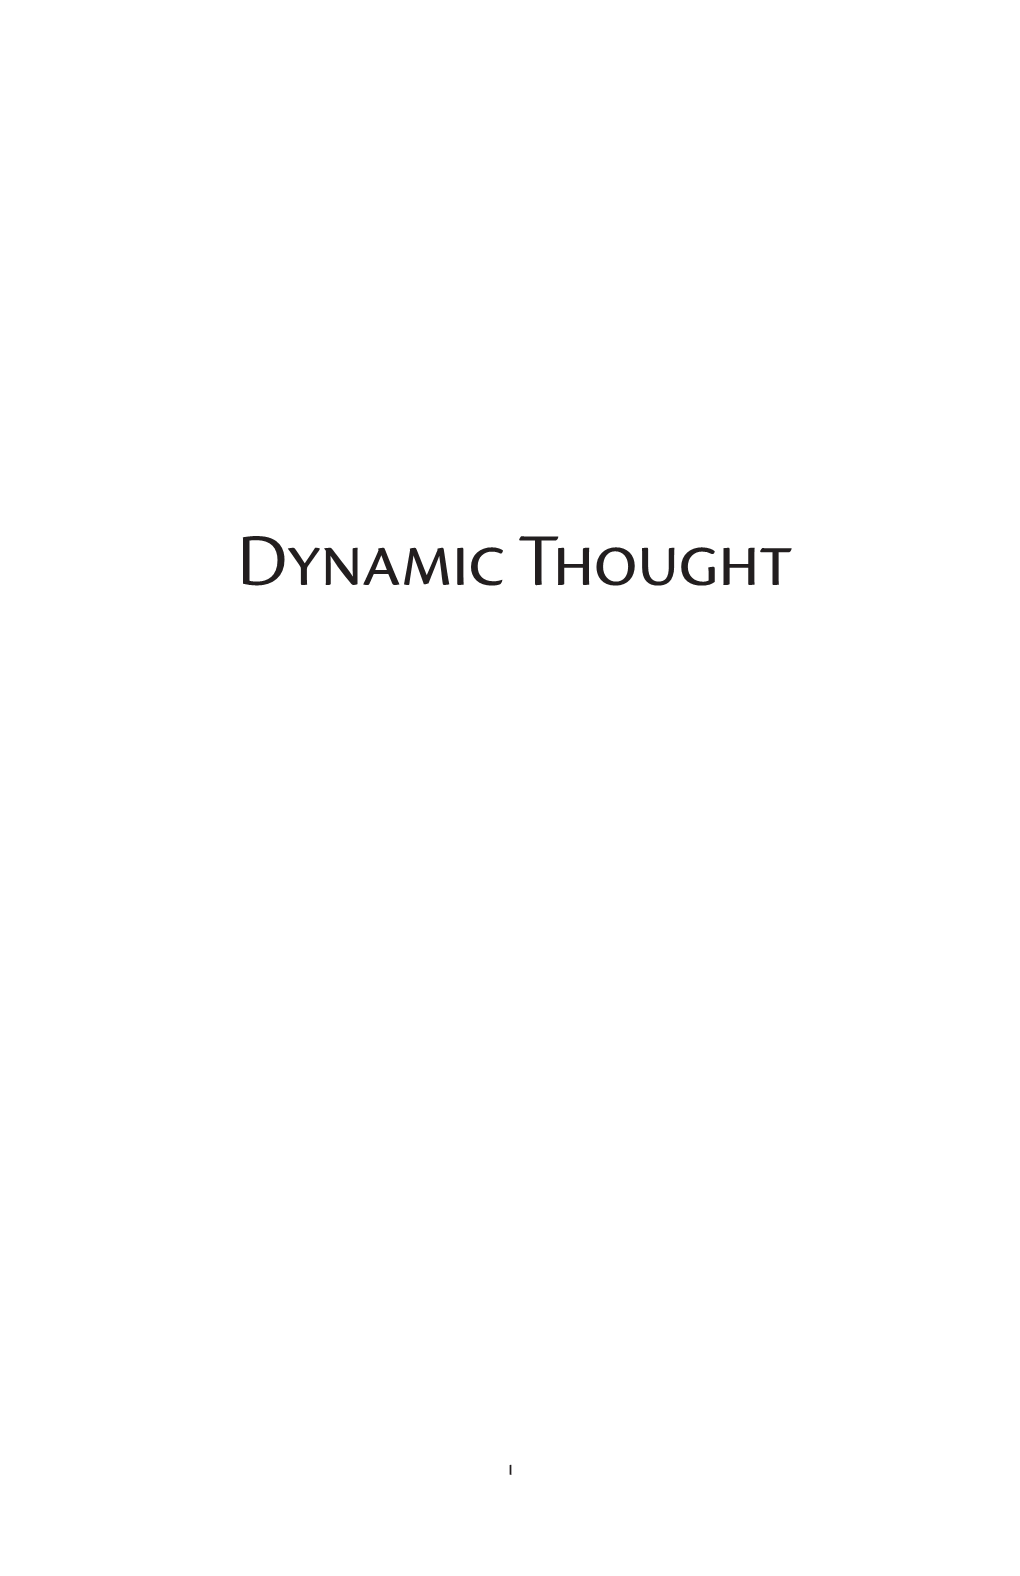 (1906-02) Dynamic Thought Or the Law of Vibrant Energy